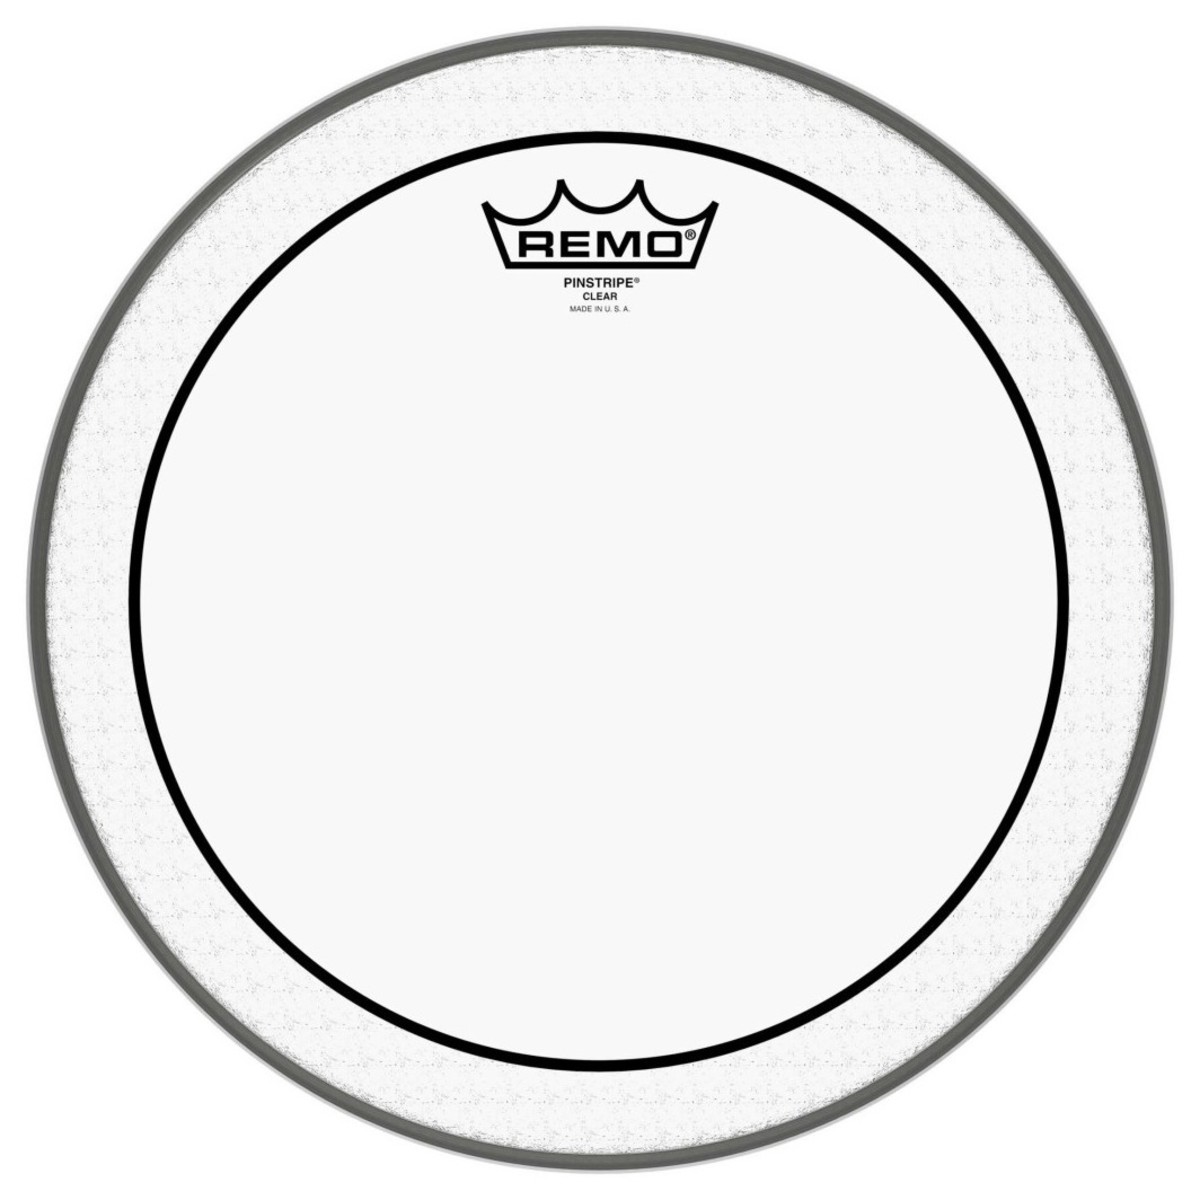 An image of Remo Pinstripe Clear 22'' Bass Drum Head | PMT Online